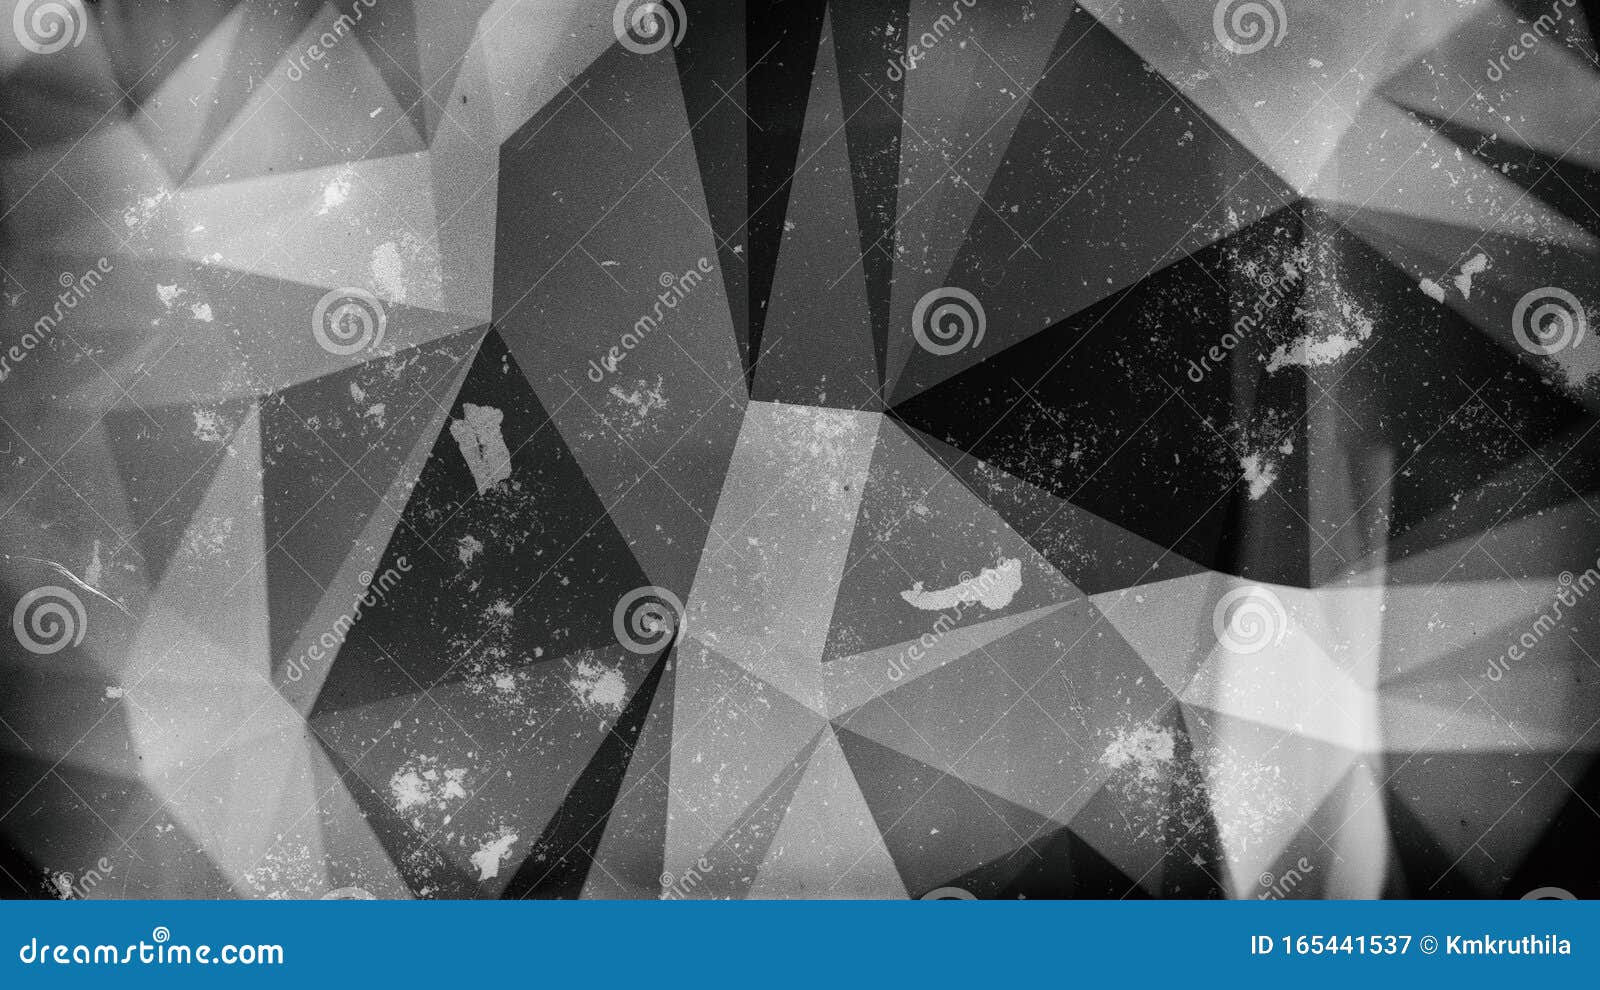 Cool Grey Distressed Polygon Triangle Background Stock Image - Image of ...